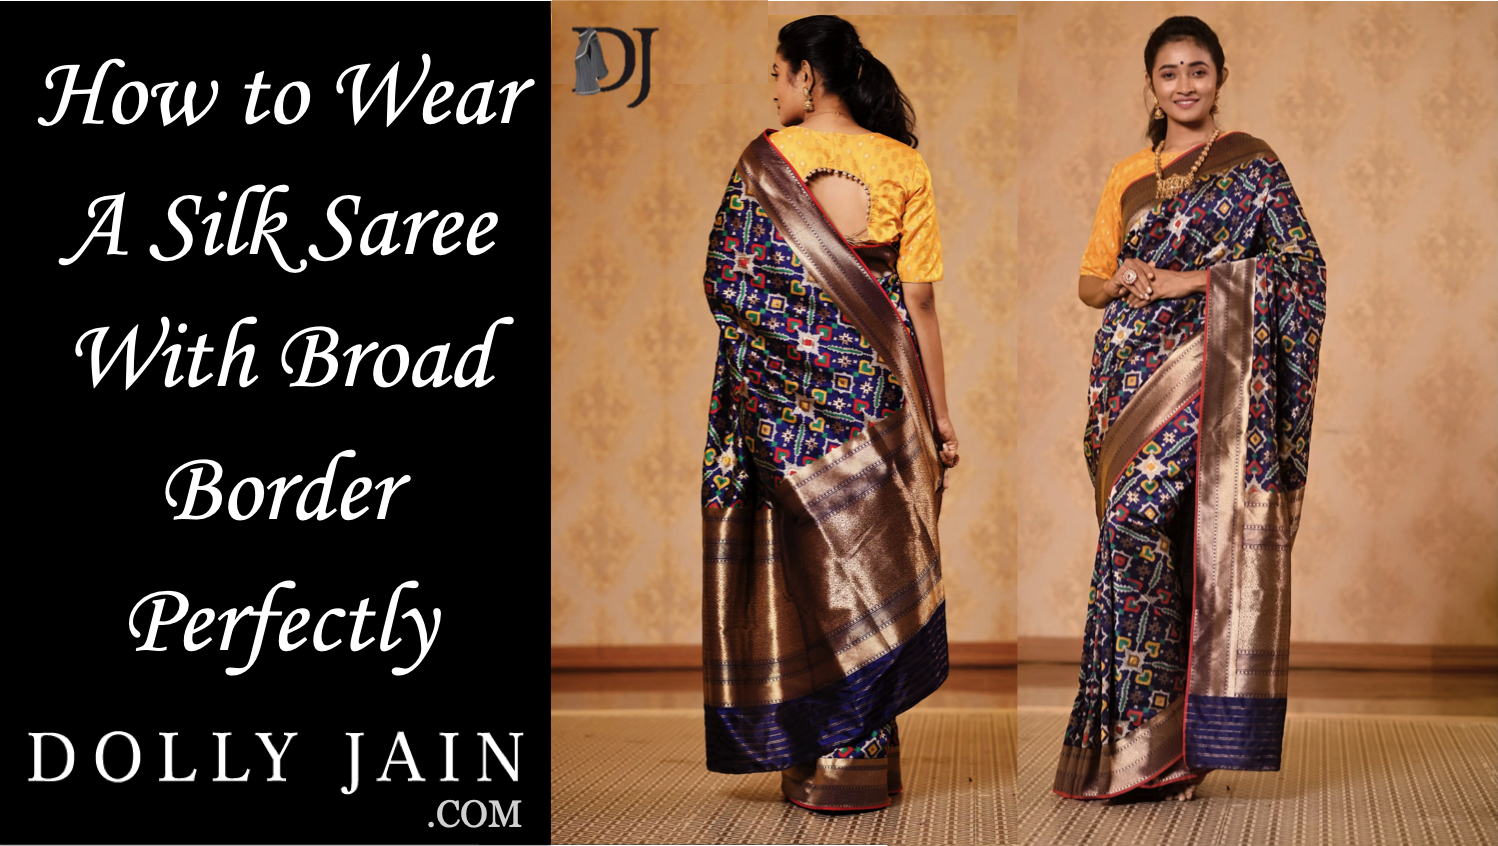 How to wear silk saree in modern style, Dolly Jain saree draping styles 